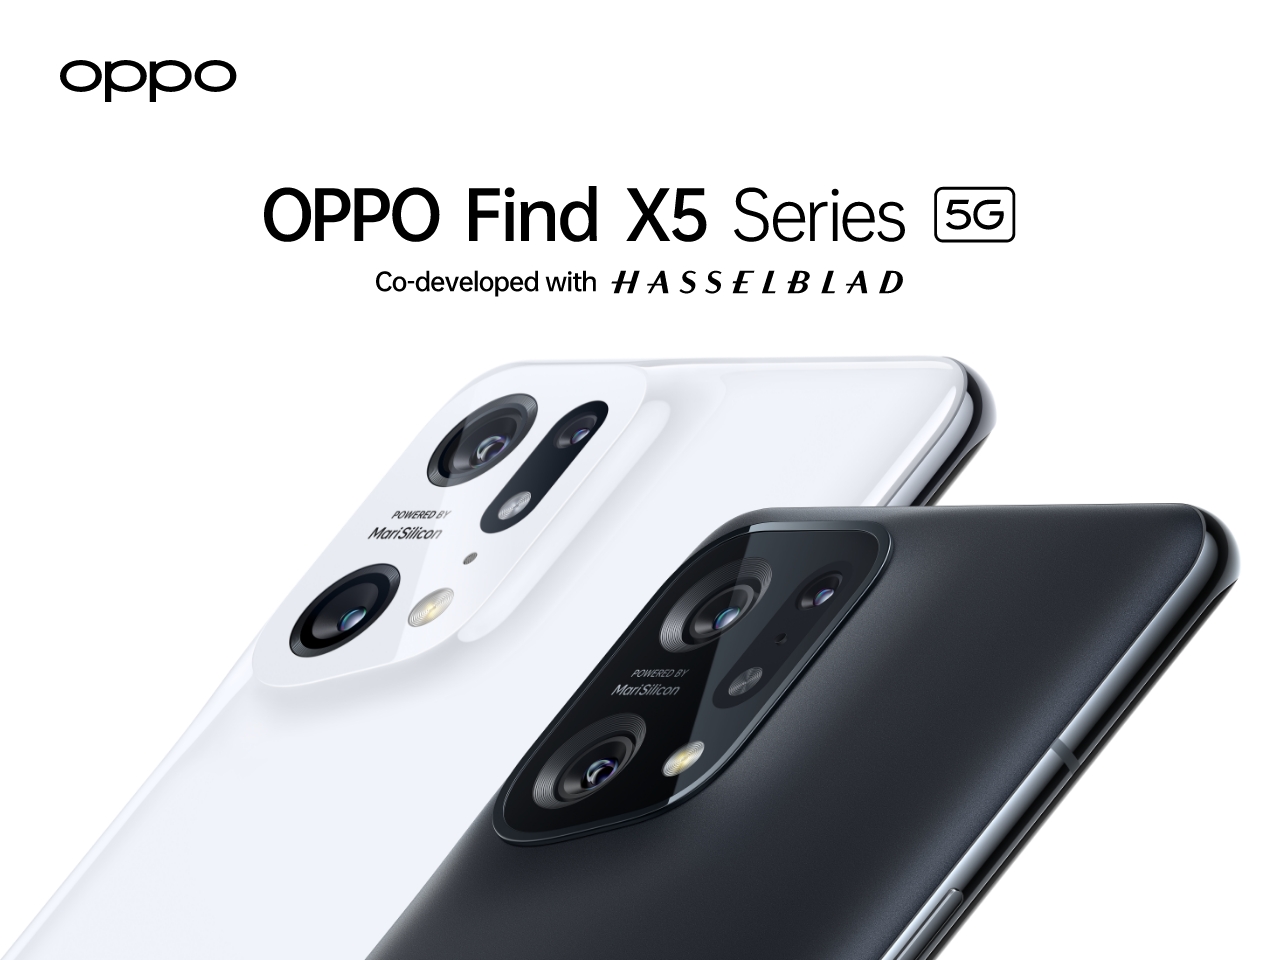 OPPO set to release the Find X5 Series in the UK